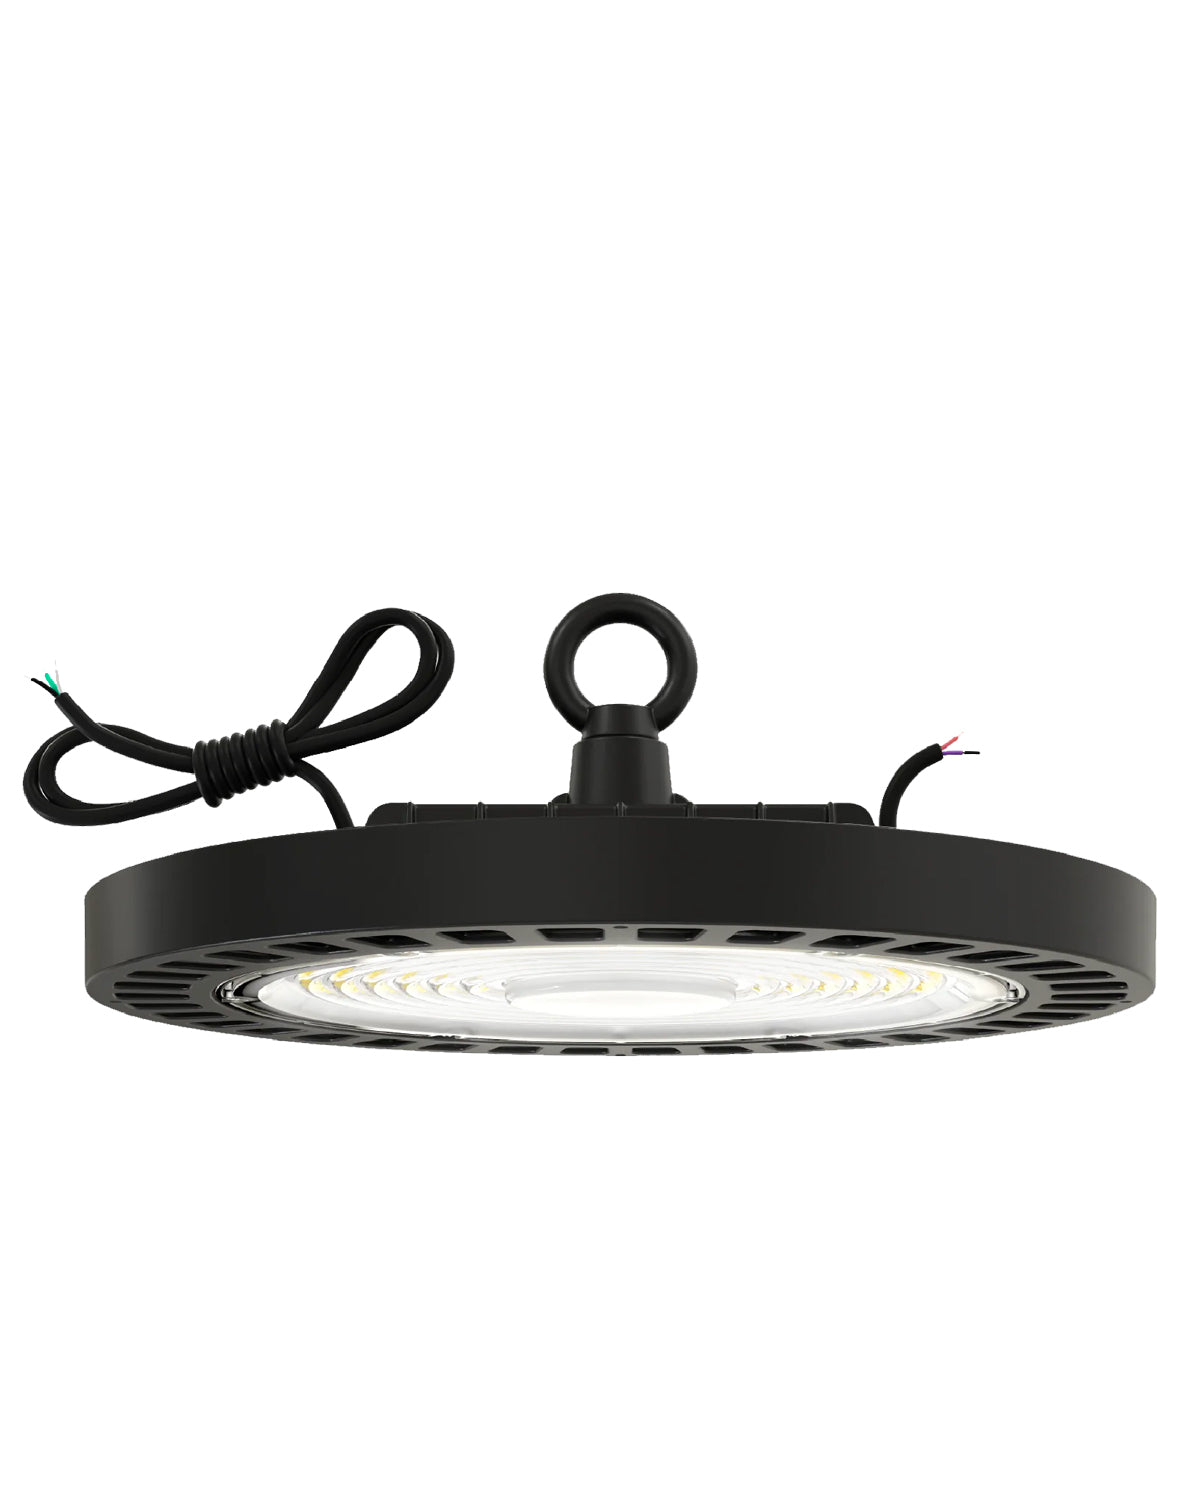 Tunable UFO LED High Bay Light: 150/200/240W, 38400Lm, IP65 Waterproof, Dimmable, Ideal for High Ceiling  4000/5000K Areas - Commercial Shops, Warehouses, Workshops, Factories, Garages